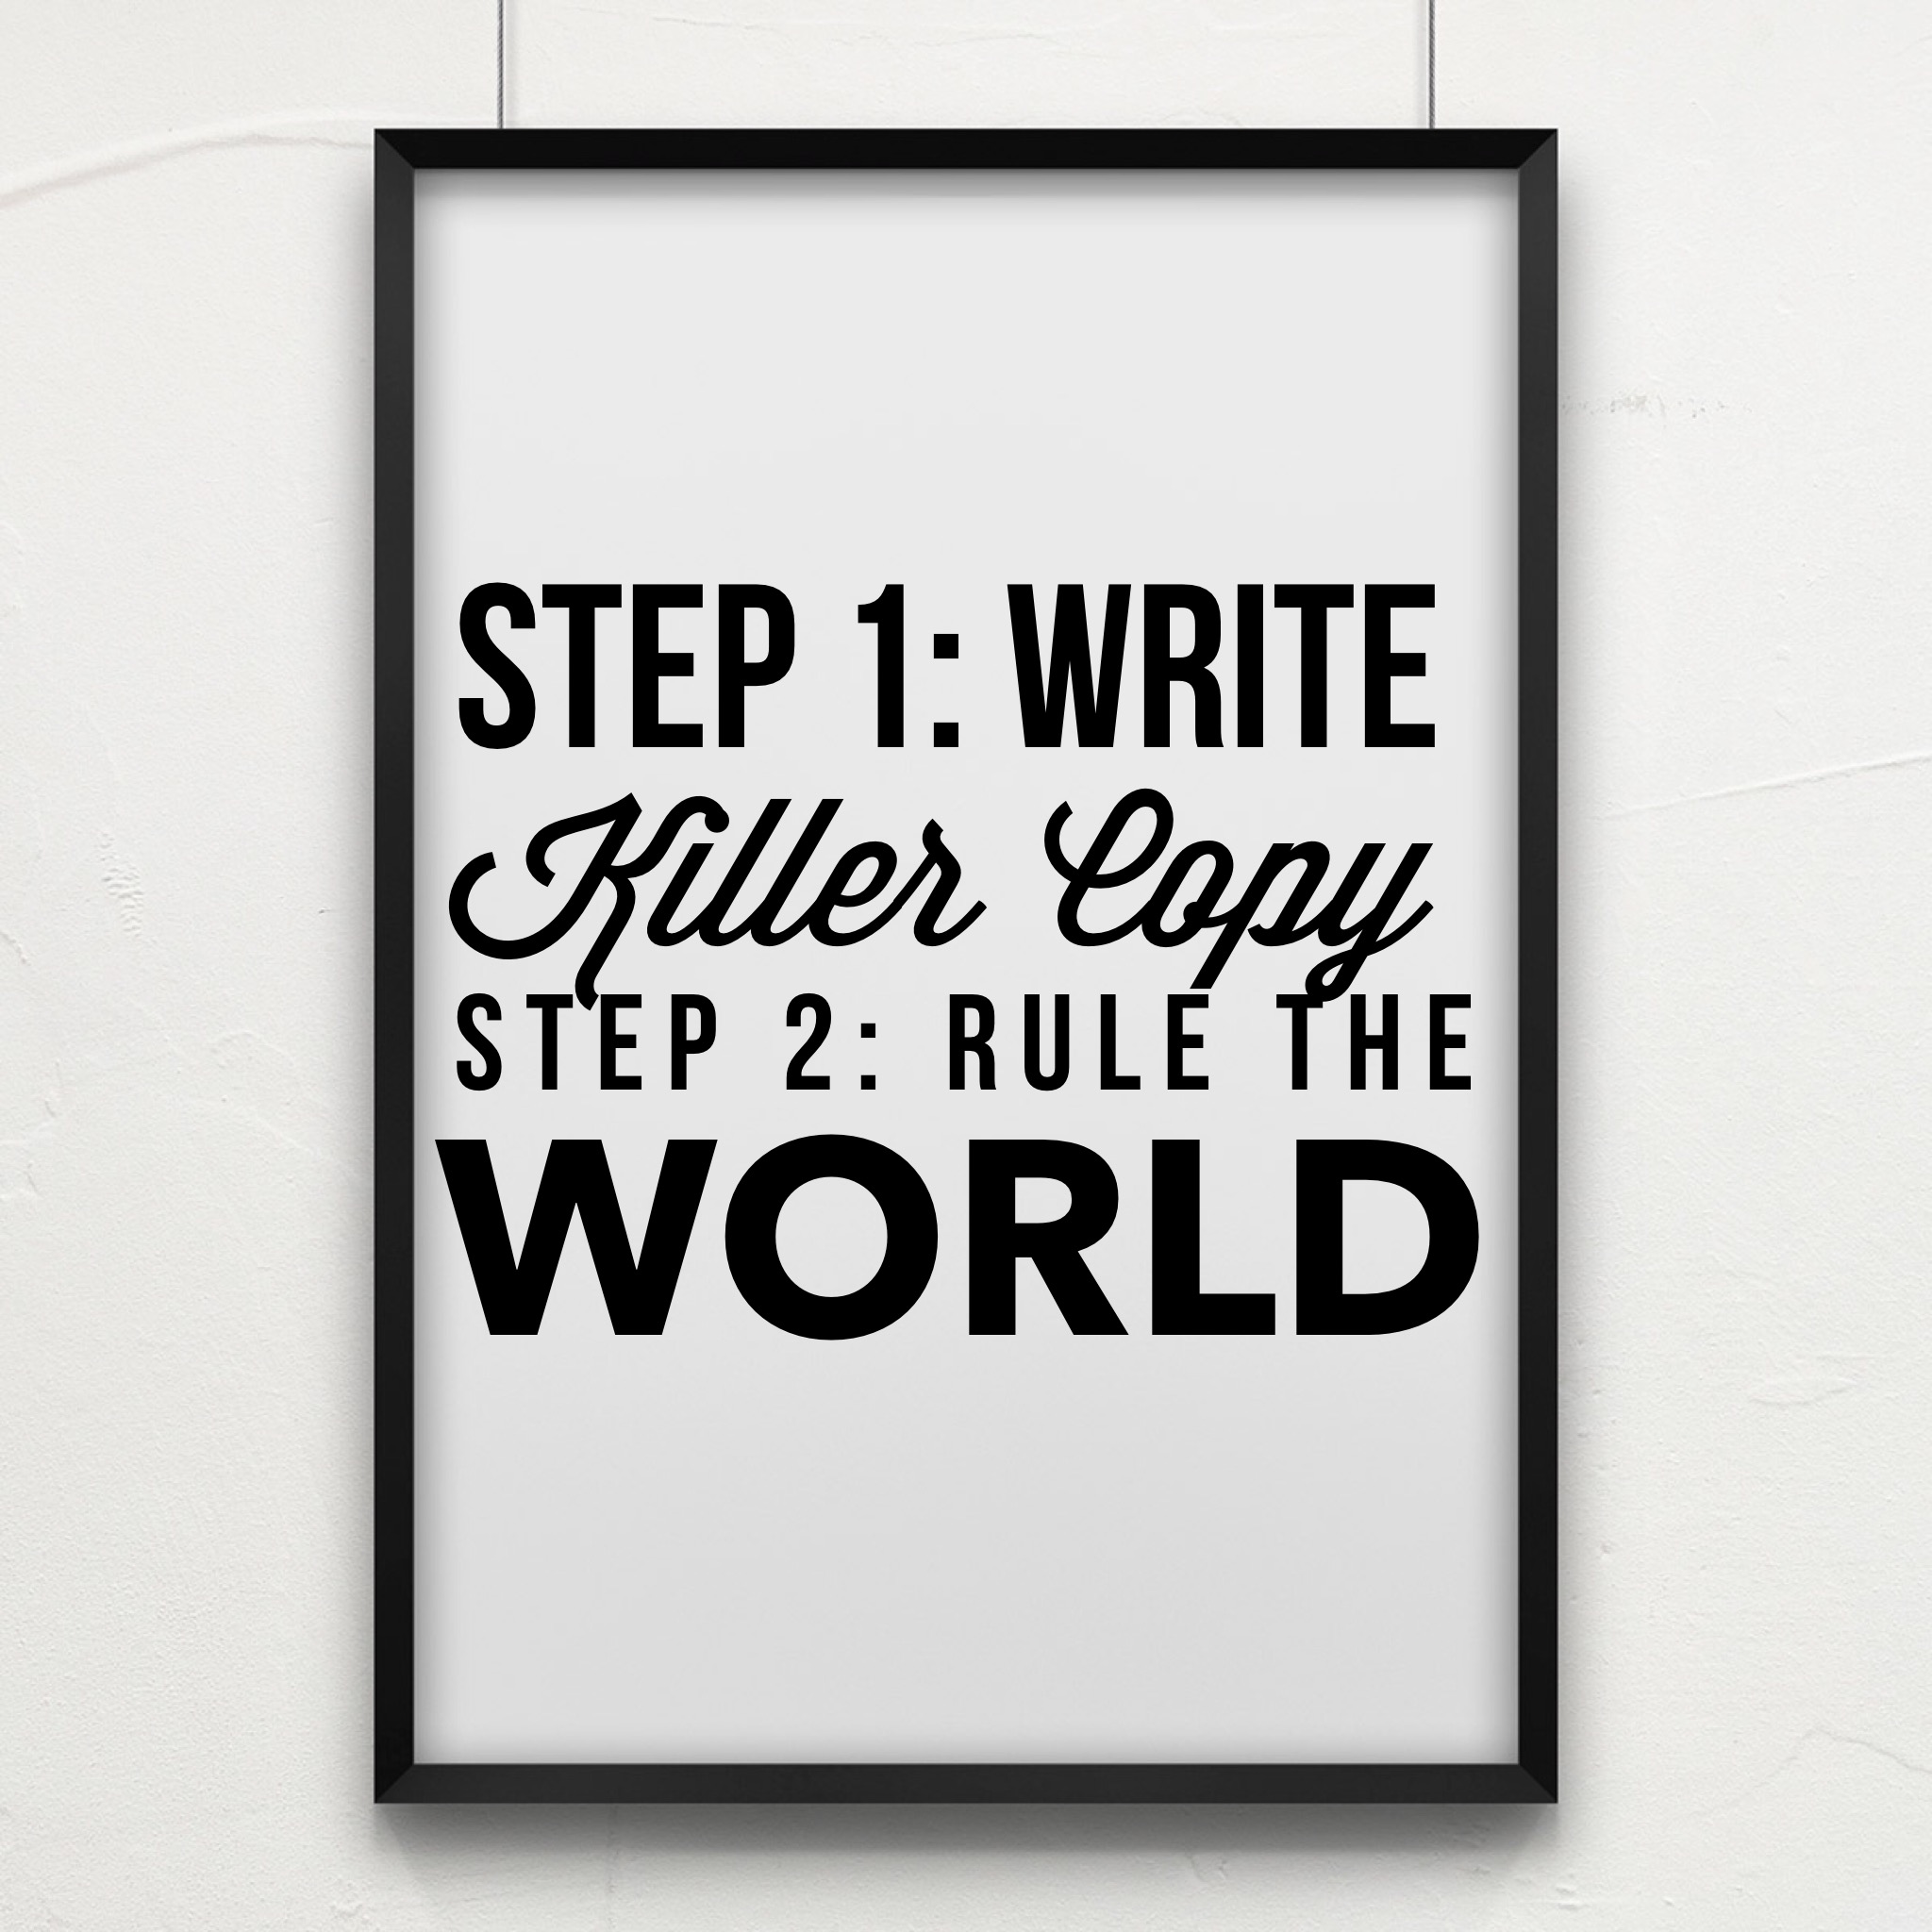 How to Write Killer Copy in 3 Easy Steps